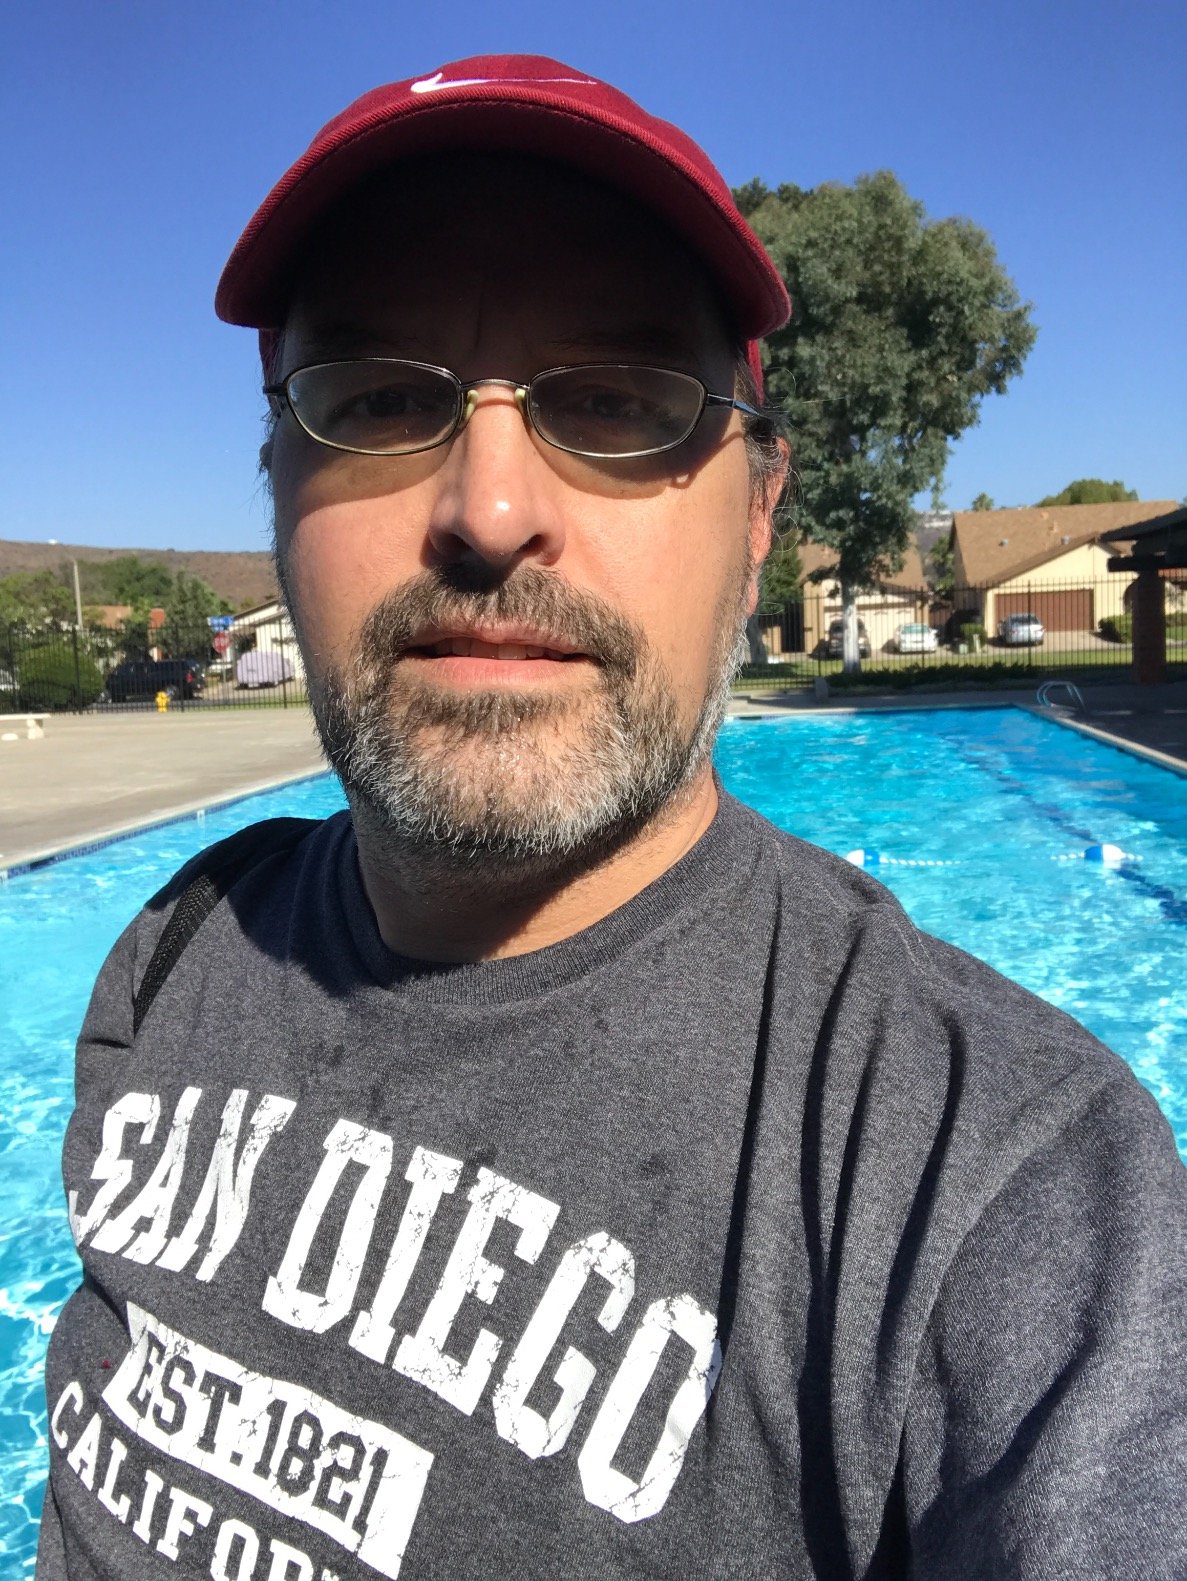 Professor of Anthropology at San Diego Mesa College, Primatologist, Metalhead, Soccer Fan, TableTop Gamer, Father, Husband, and Geek. (He/Him)